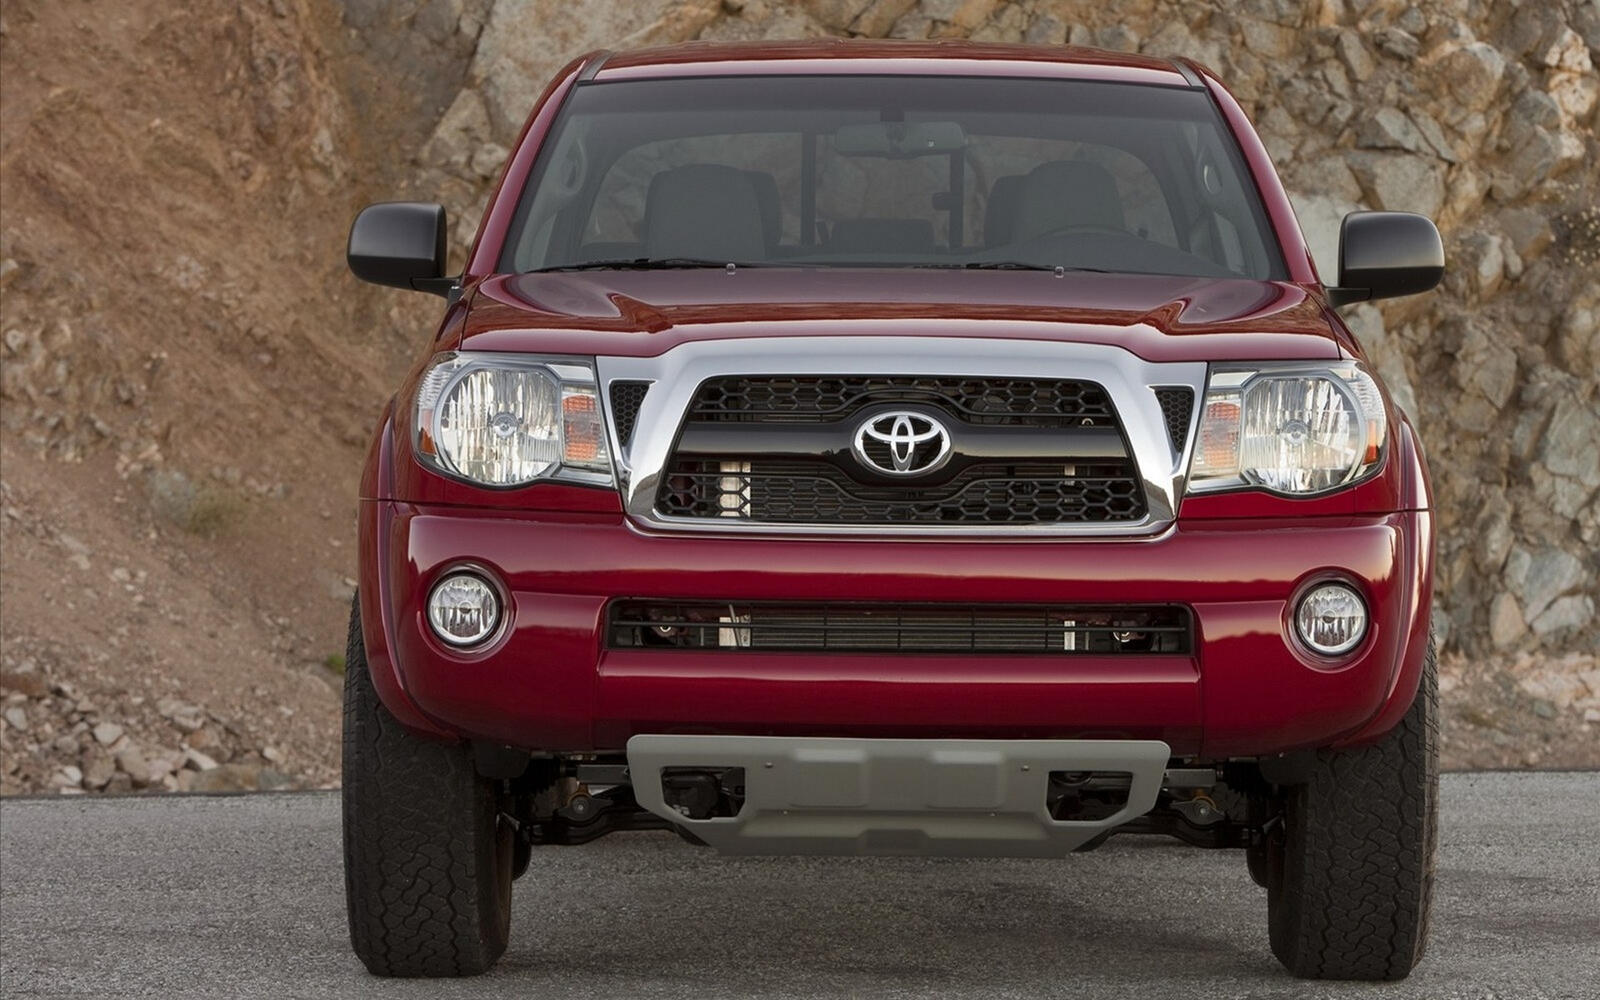 Wallpapers Toyota SUV cherry on the desktop